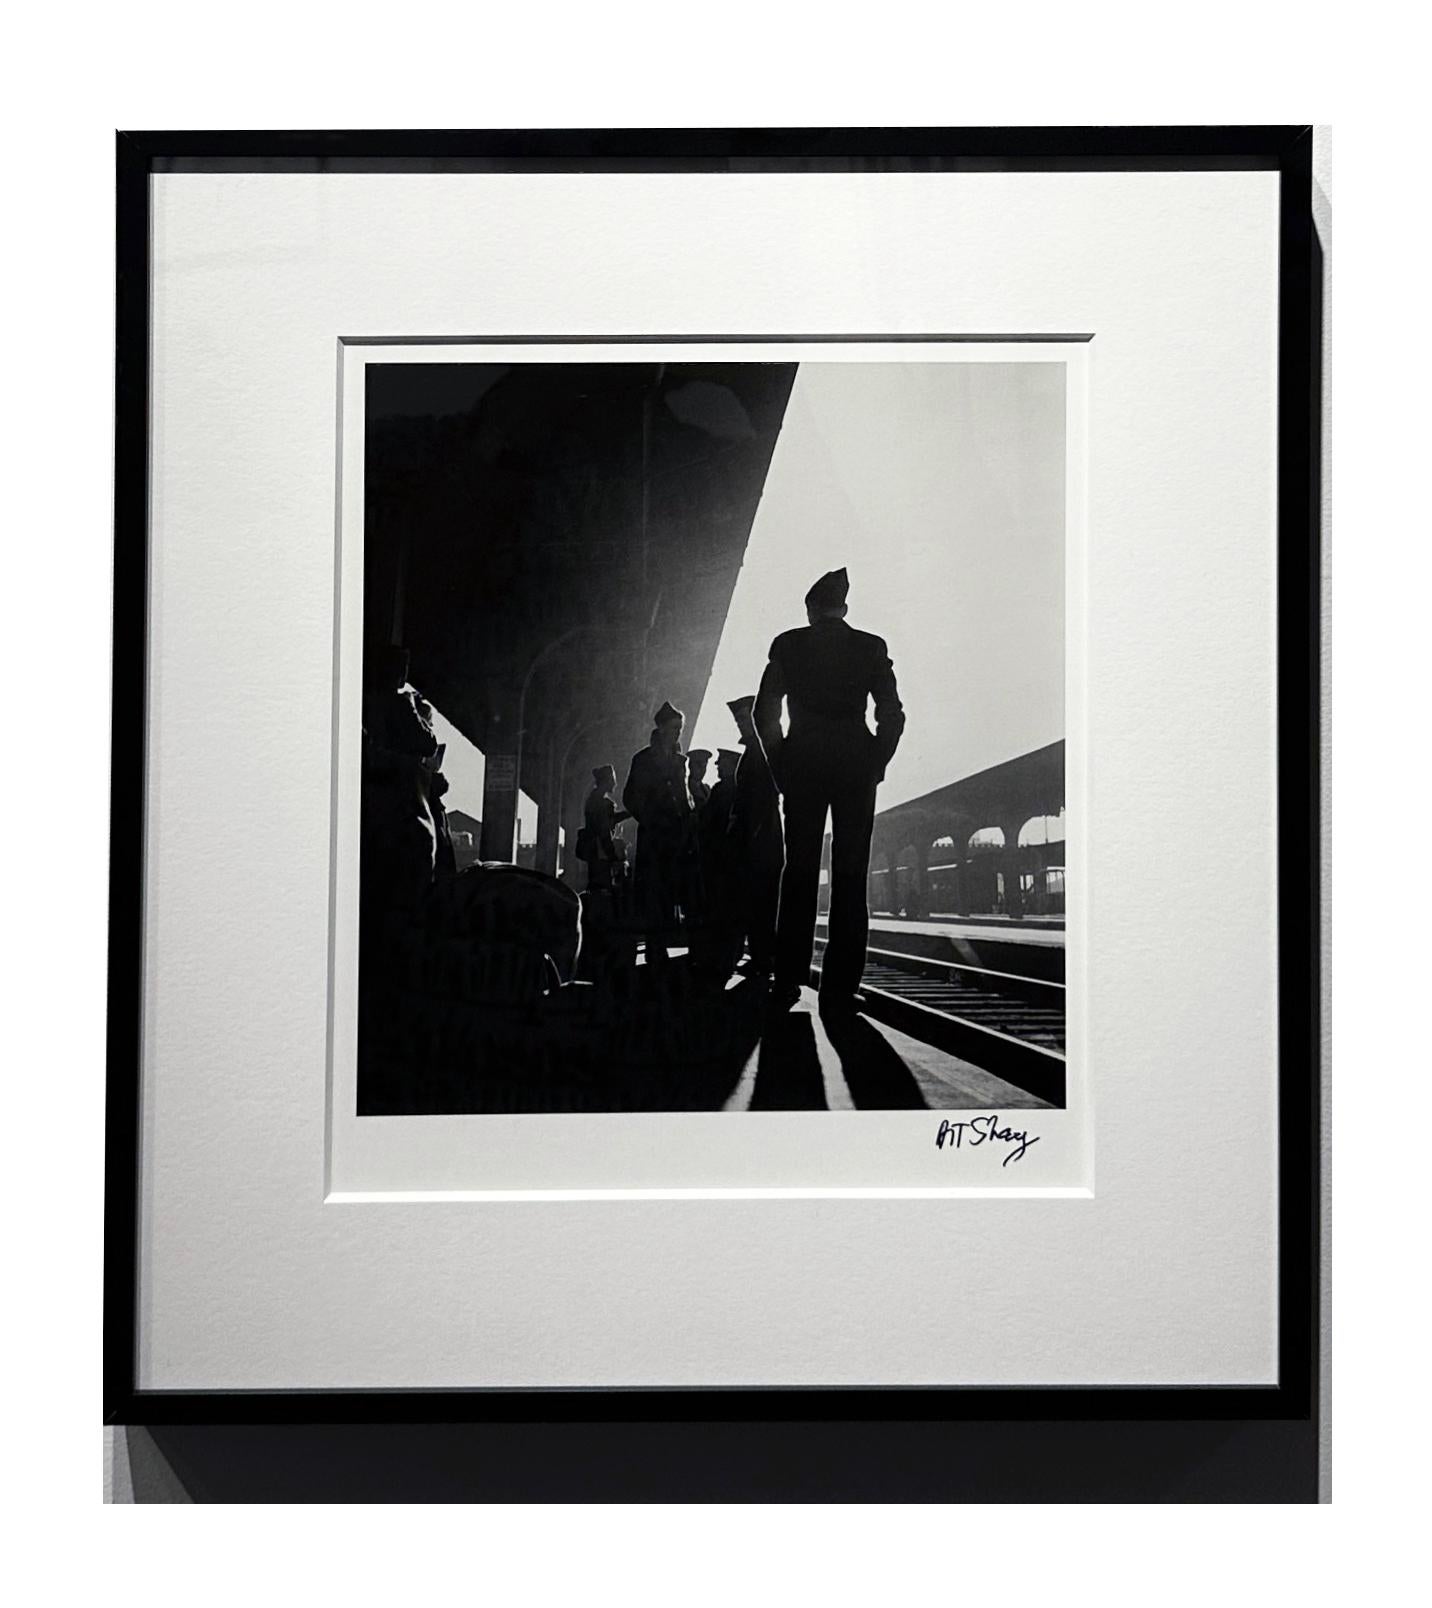 “Art Shay’s photography shakes you up, sets you down gently, pats you on the head and then kicks you in the ass.” Roger Ebert   “[Shay’s work] ranks with some of the greats of the 20th century.” Ellen & Richard Sandor, Renowned photo collectors  